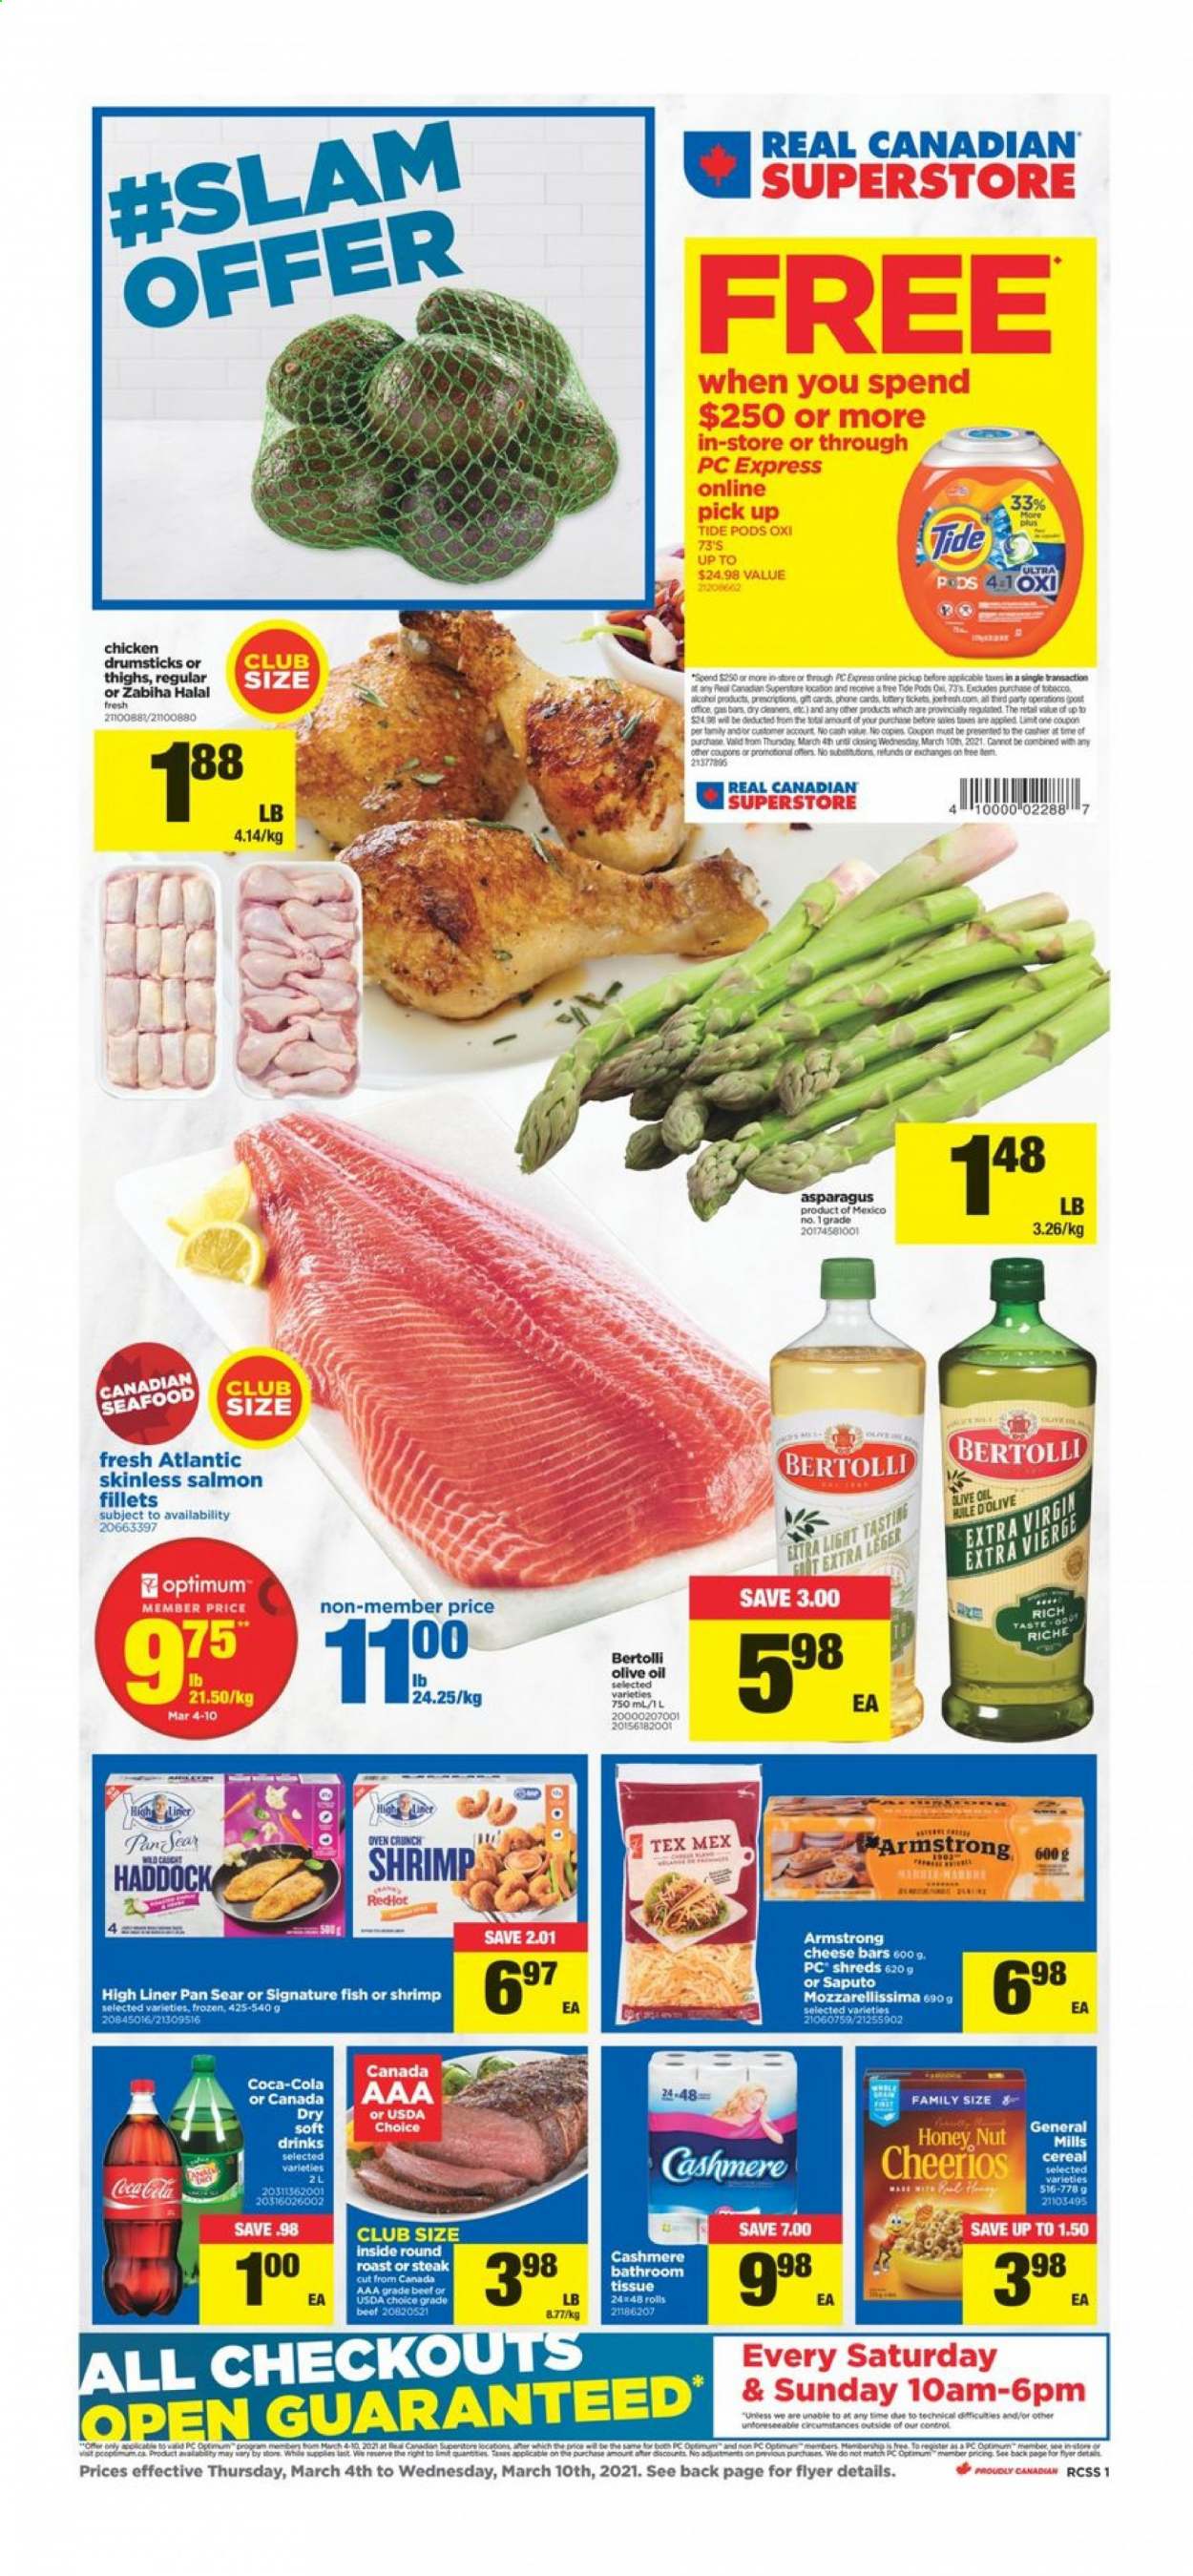 thumbnail - Circulaire Real Canadian Superstore - 04 Mars 2021 - 10 Mars 2021 - Produits soldés - Coca-Cola, cahier, steak, haddock. Page 1.